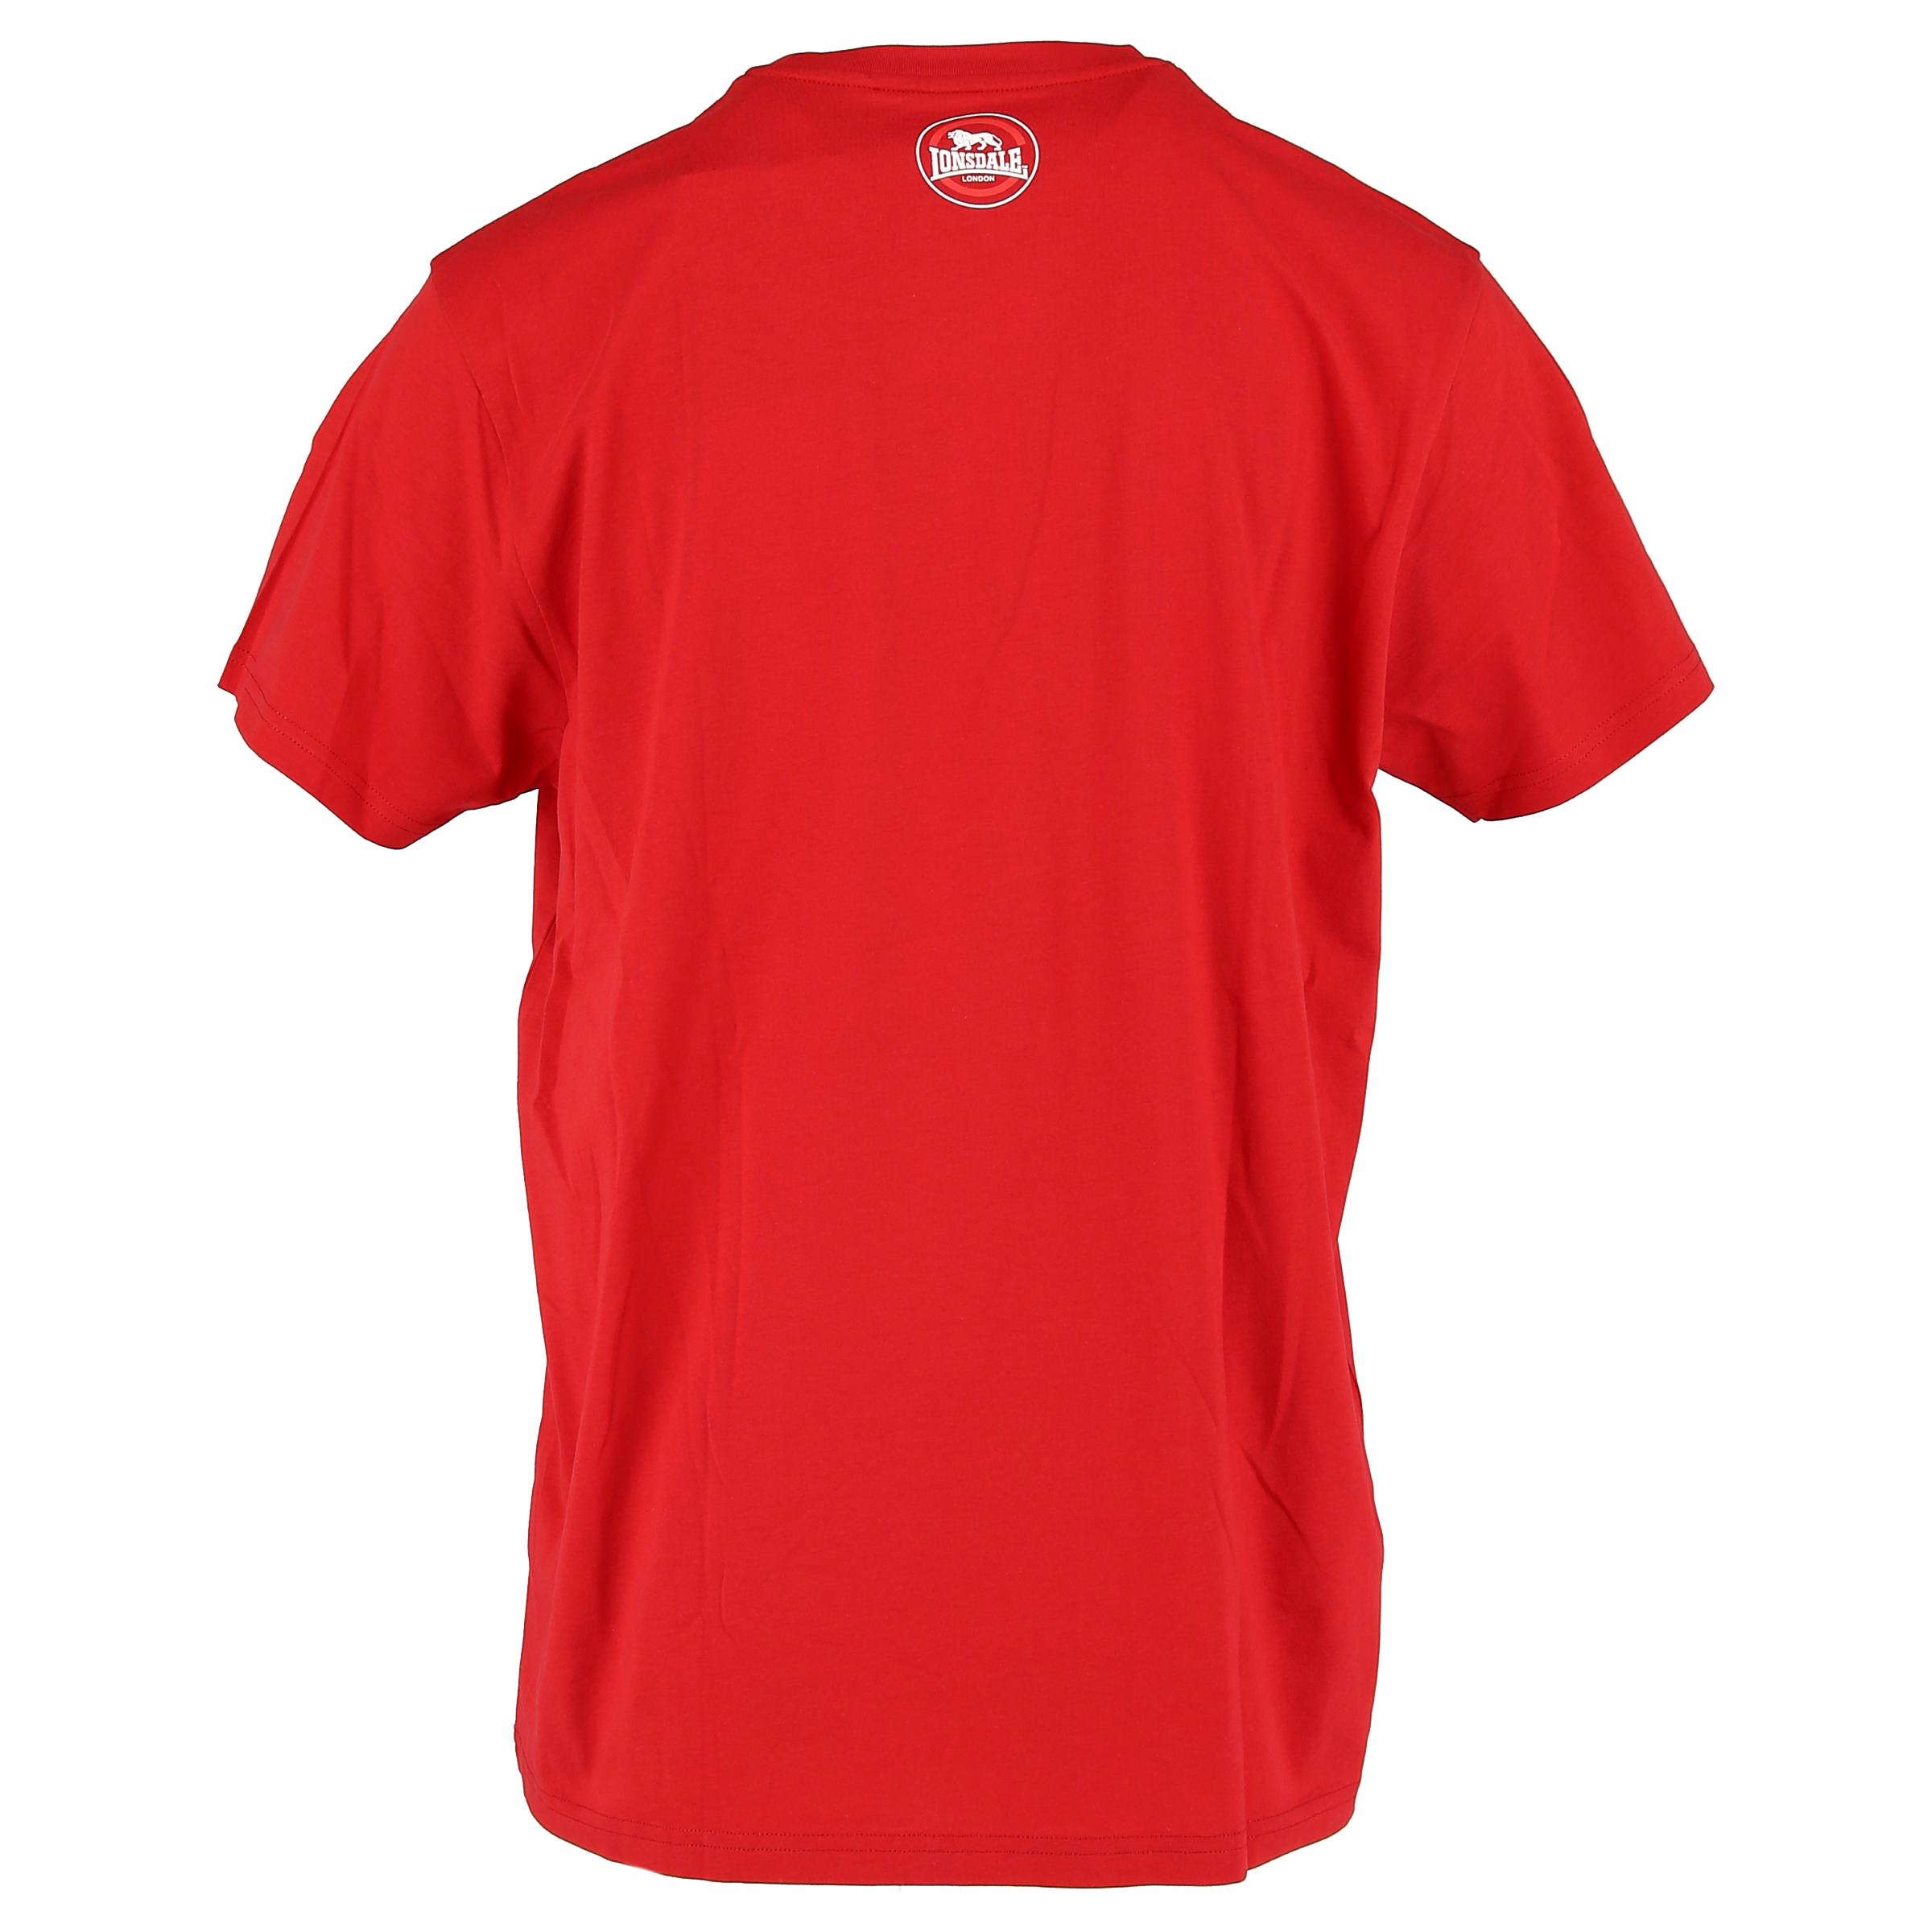 Lonsdale Lonsdale Mens Tee 